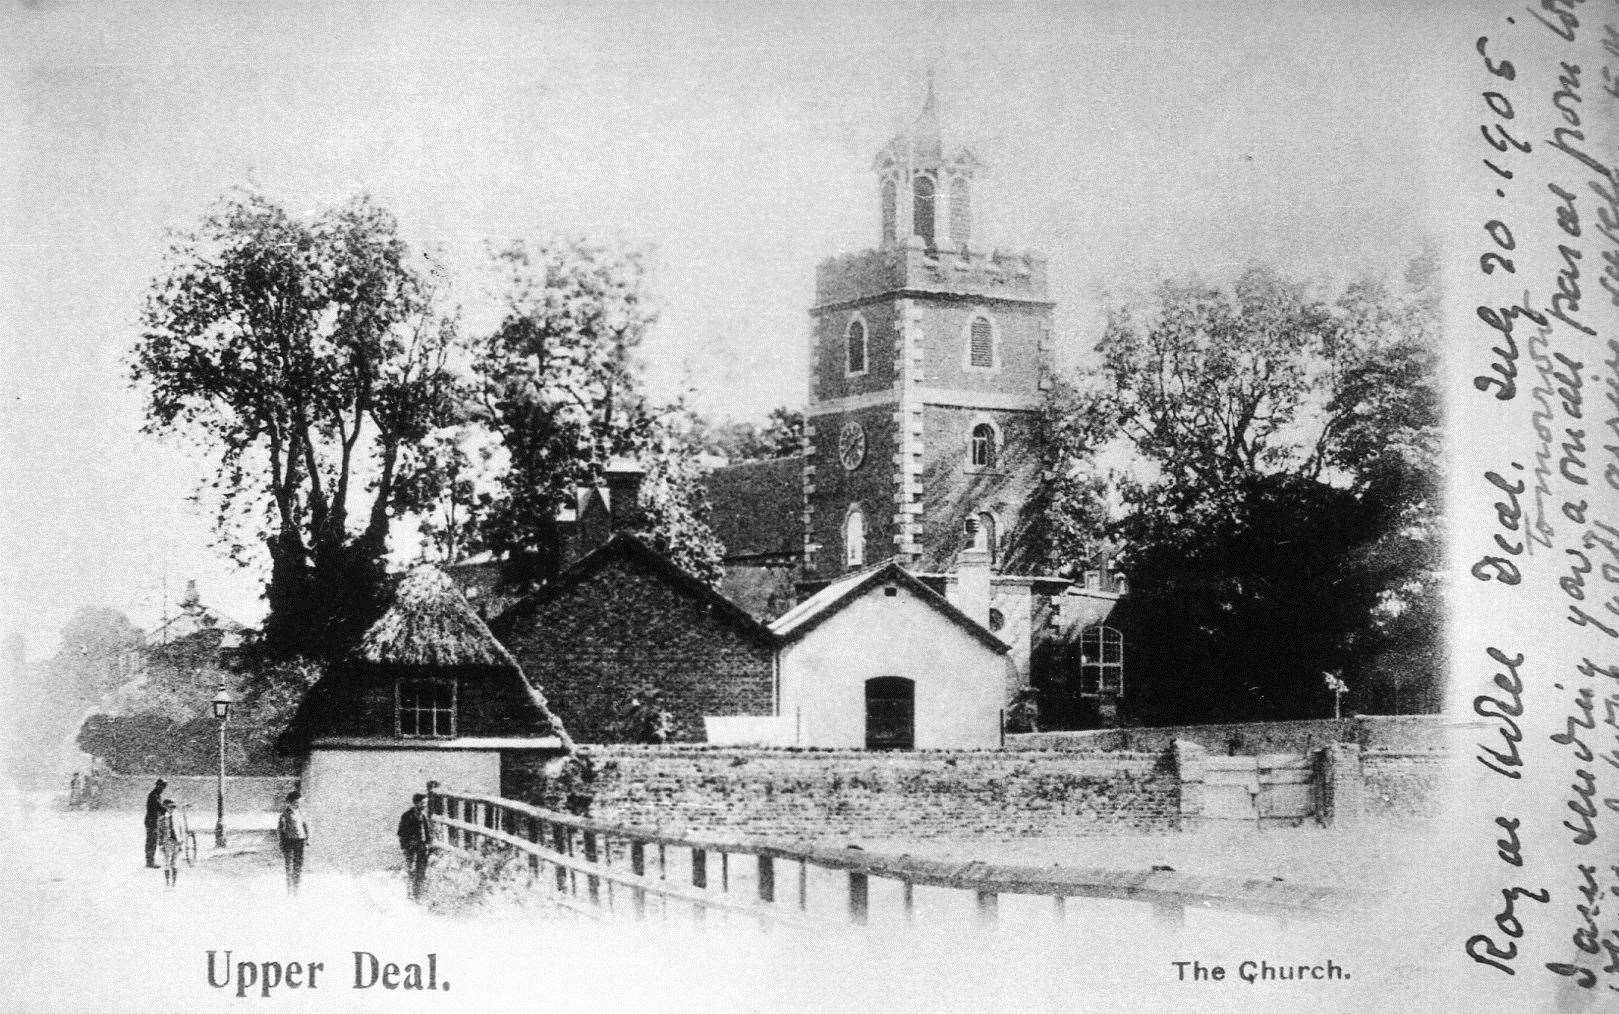 Another view of St Leonard's Church at Upper Deal